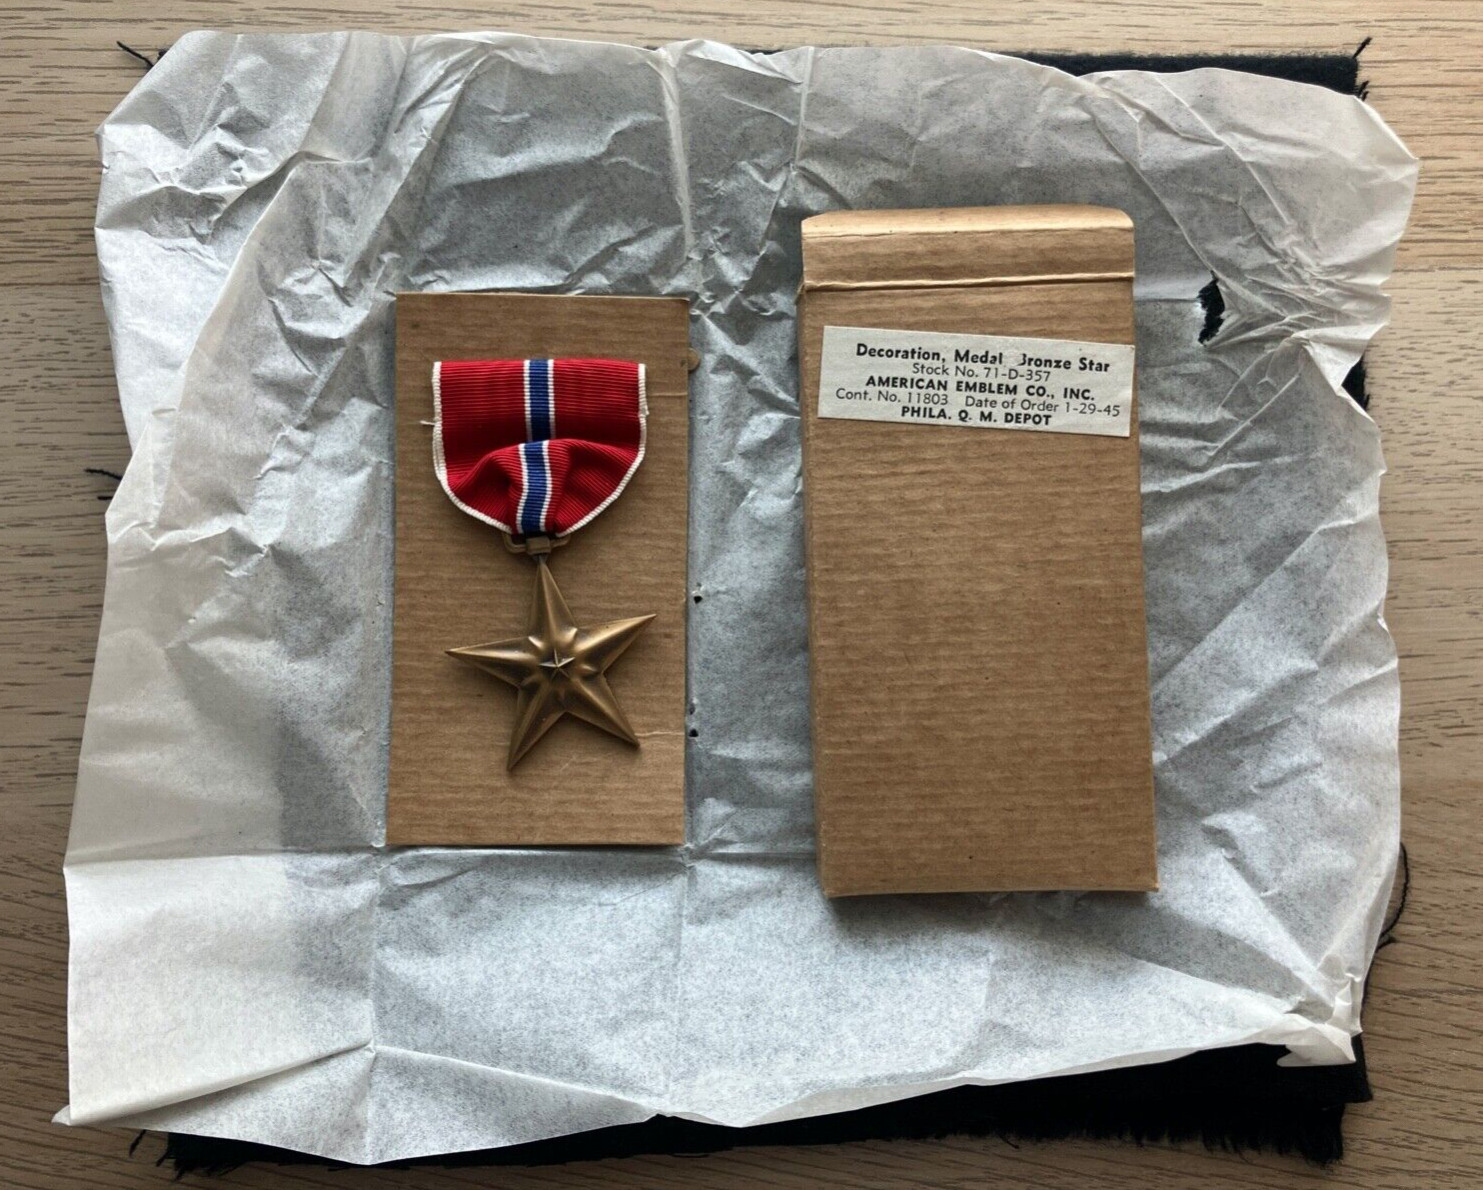 WWII Bronze Star Medal in original 1945 box and packaging. United States